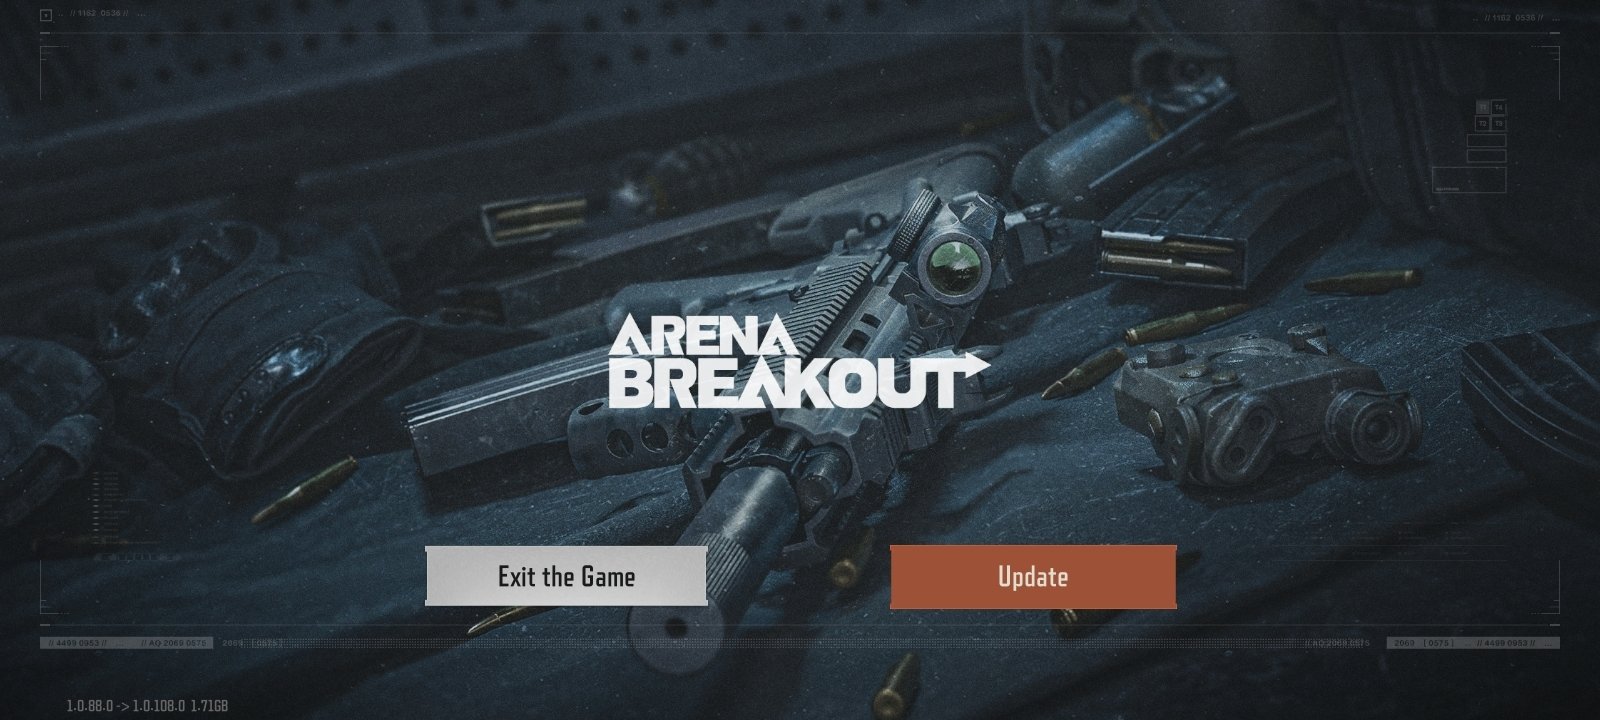 How to download Arena Breakout Lite version for Android phone